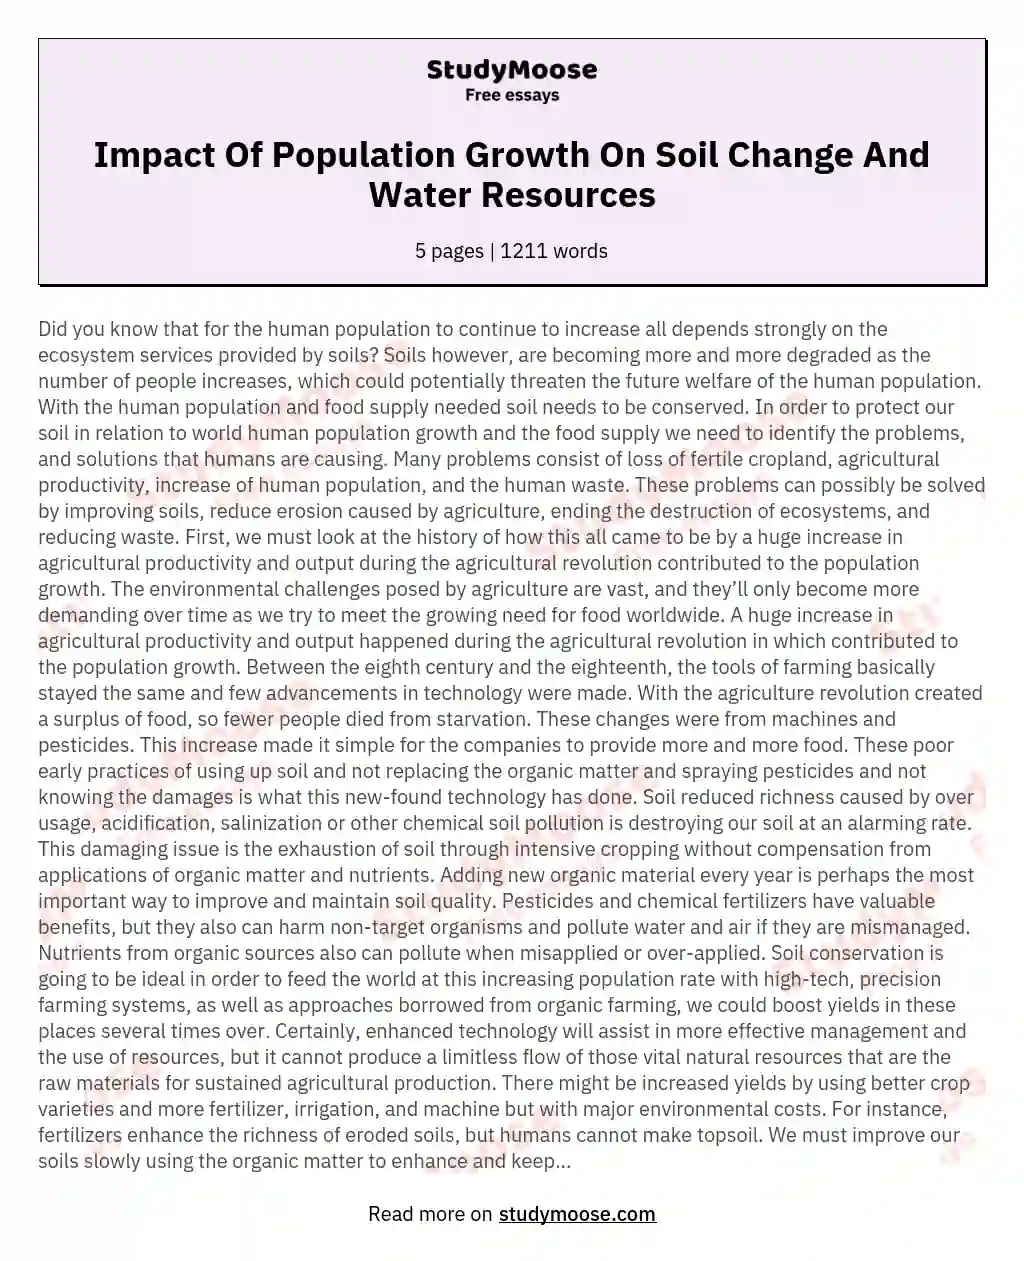 Impact Of Population Growth On Soil Change And Water Resources essay